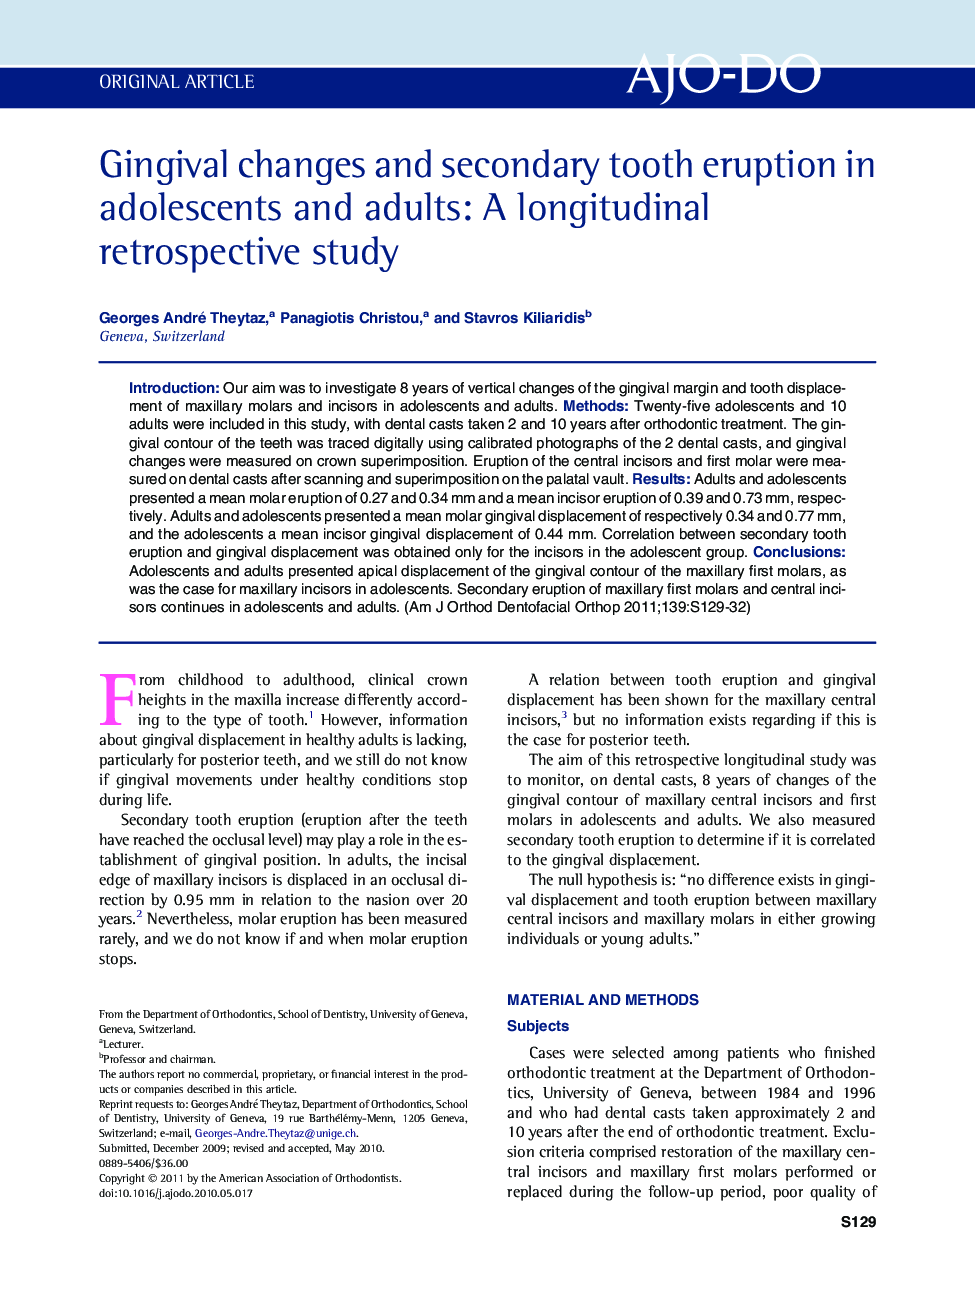 Gingival changes and secondary tooth eruption in adolescents and adults: A longitudinal retrospective study 